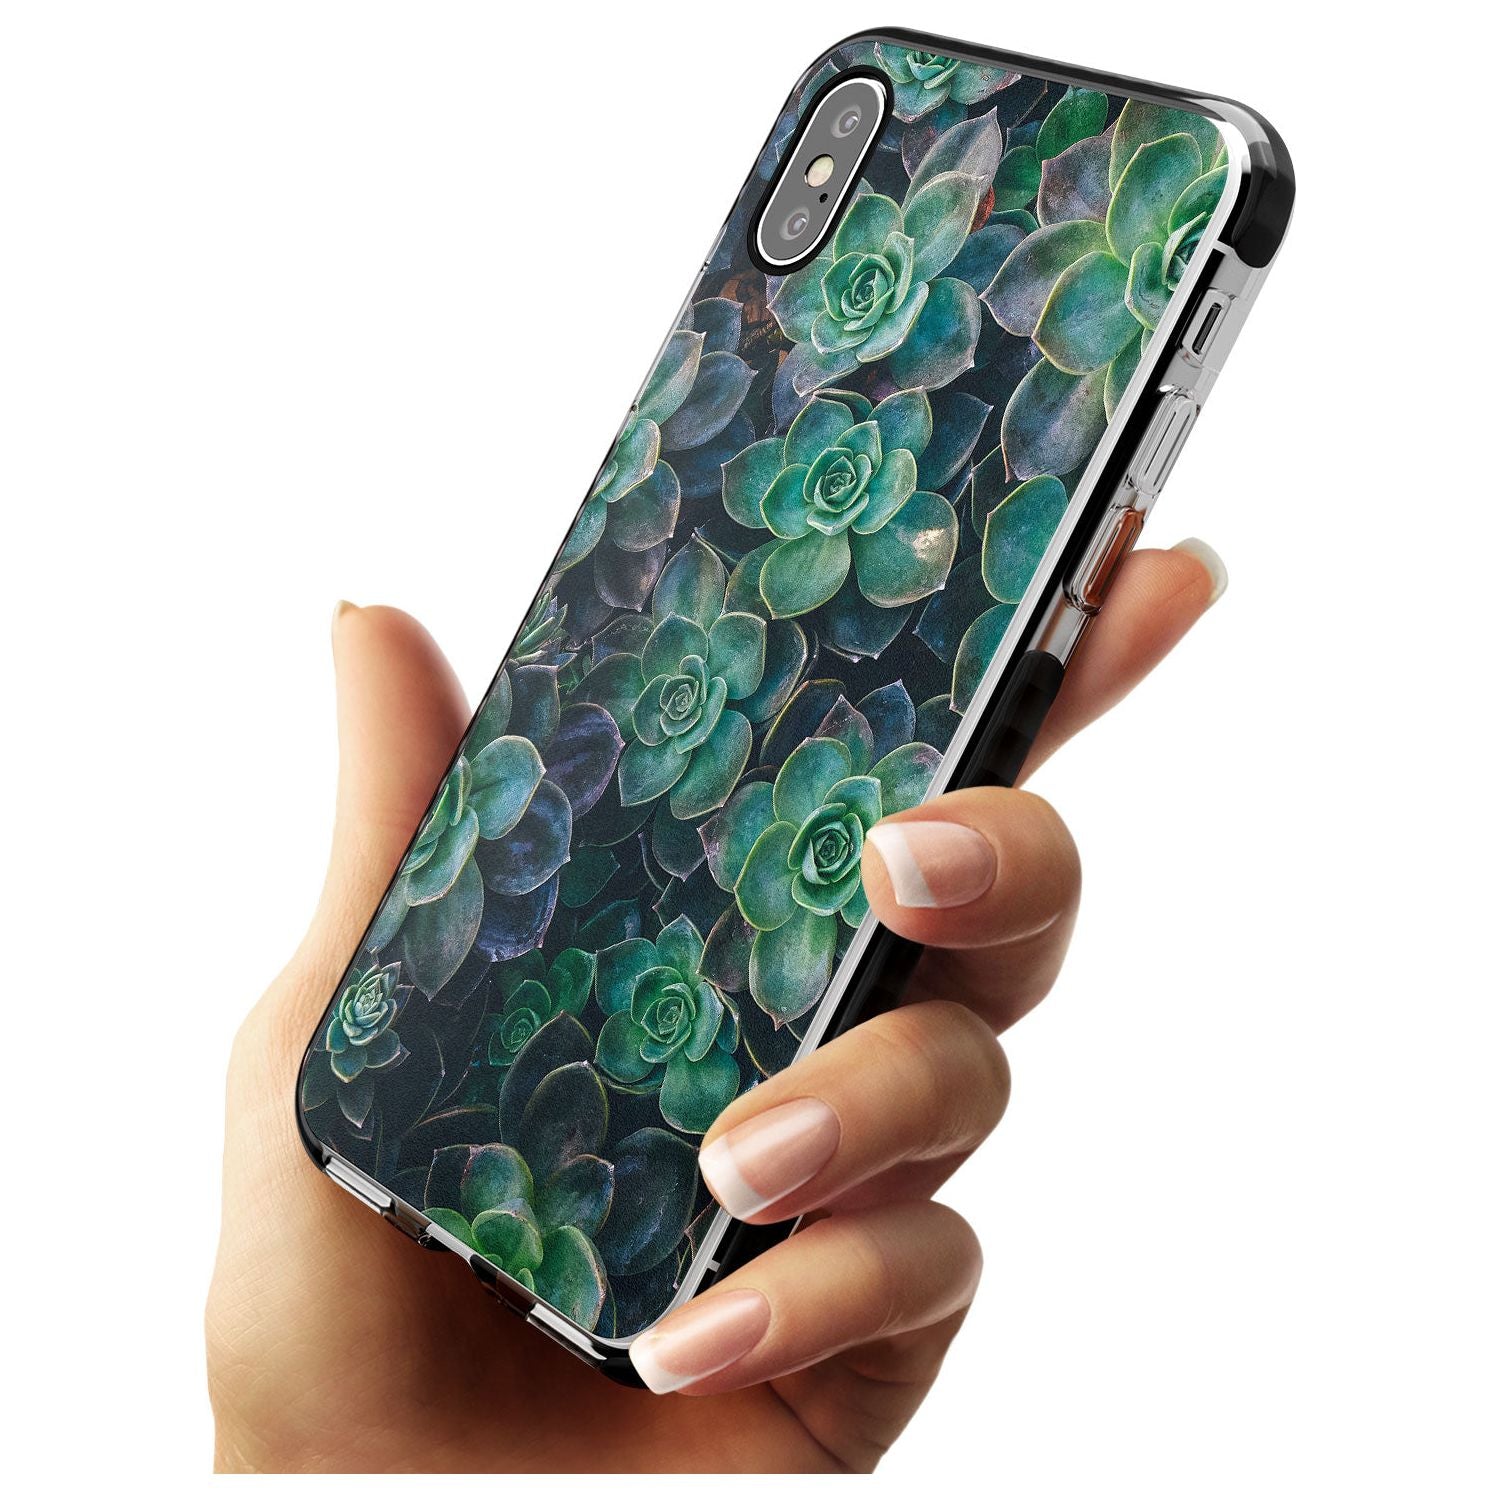 Succulents - Real Botanical Photographs Black Impact Phone Case for iPhone X XS Max XR